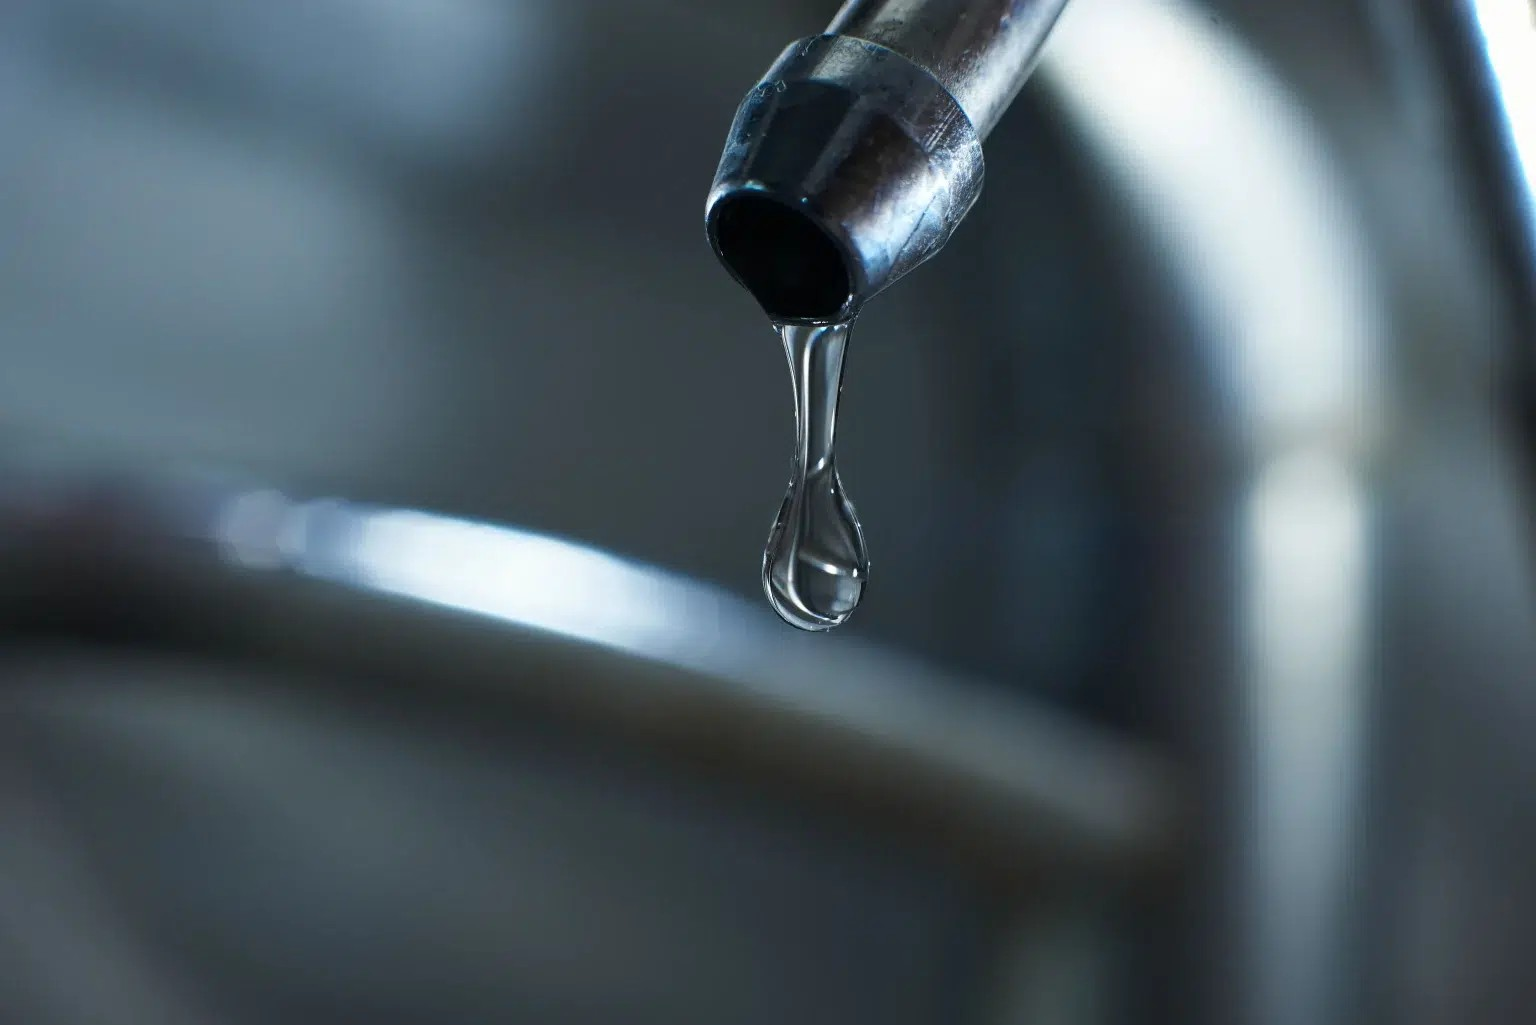 #PODCAST Robust legal framework needed to address SA's water crisis #sabcnews